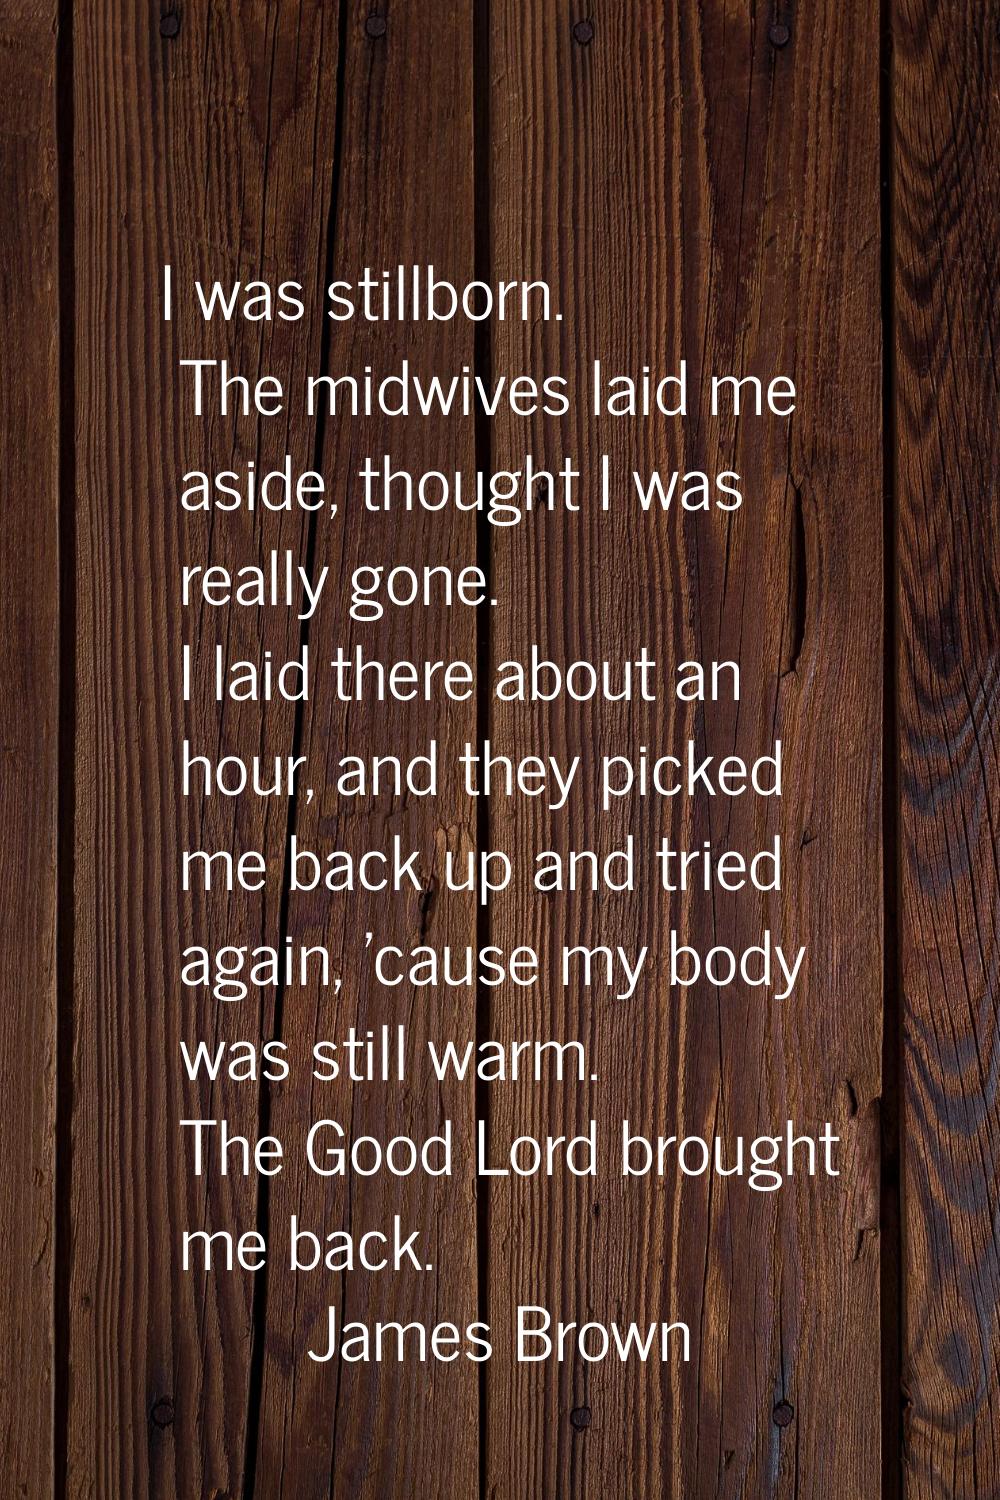 I was stillborn. The midwives laid me aside, thought I was really gone. I laid there about an hour,